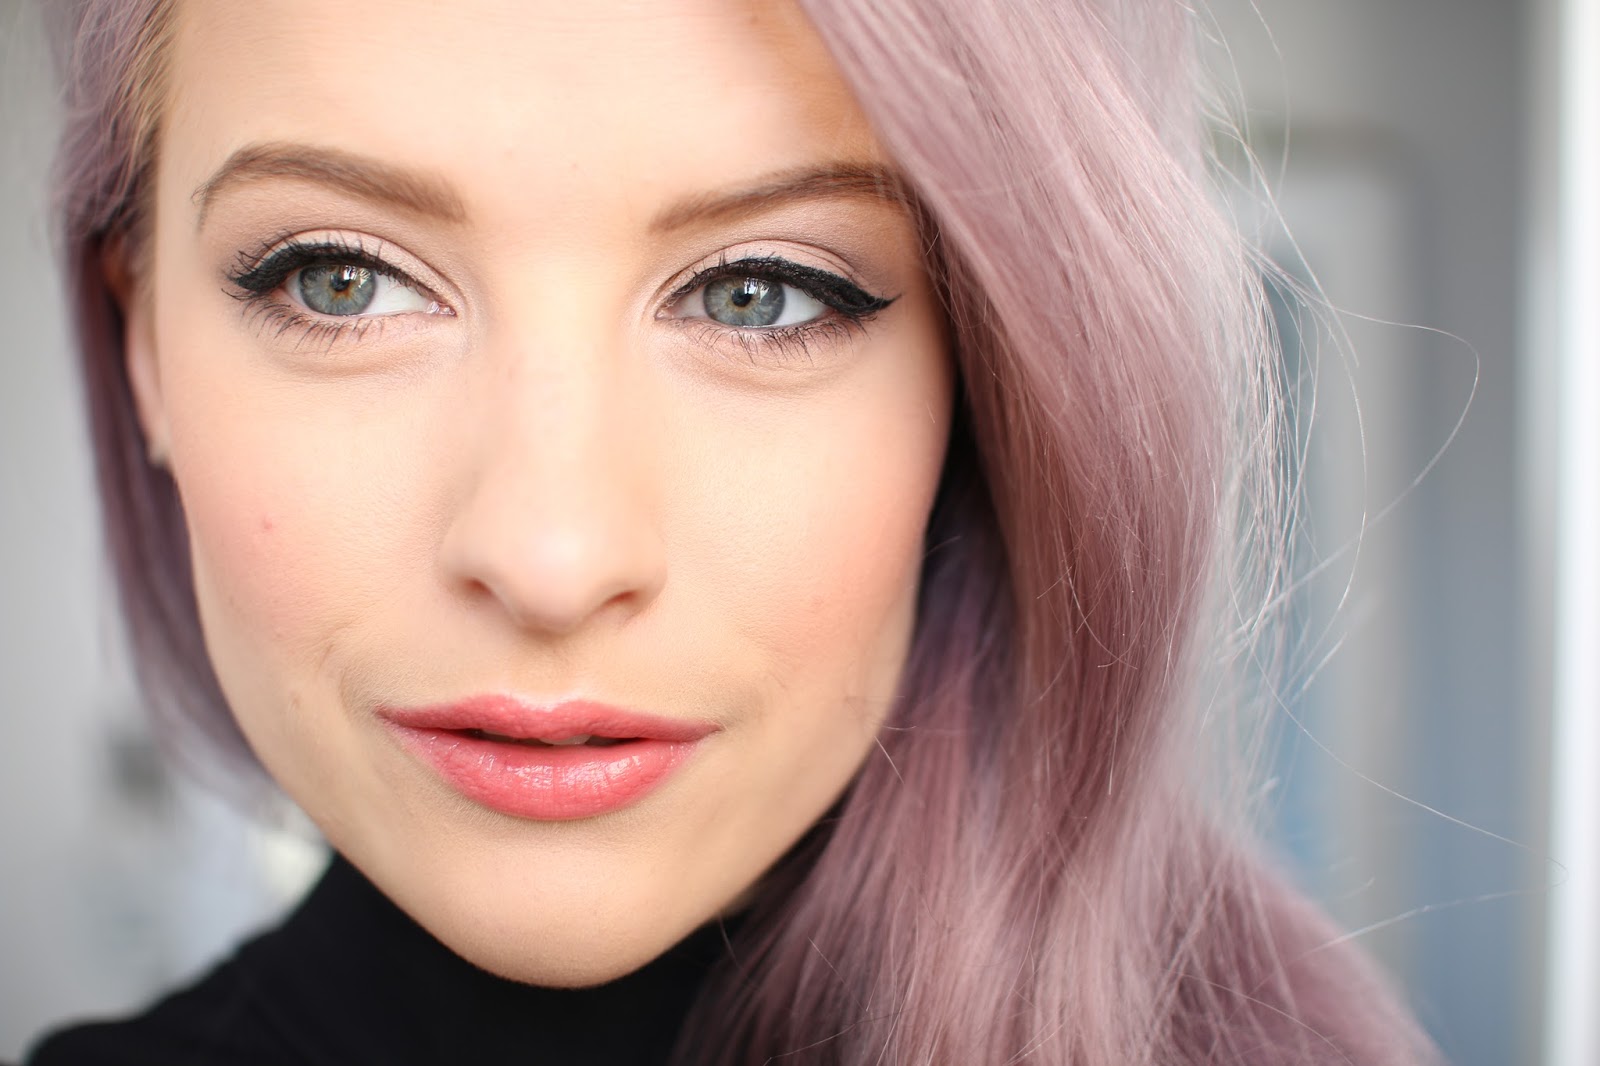 4. "Trend Alert: Blue and Purple Hair is the New Must-Try Color" - wide 2